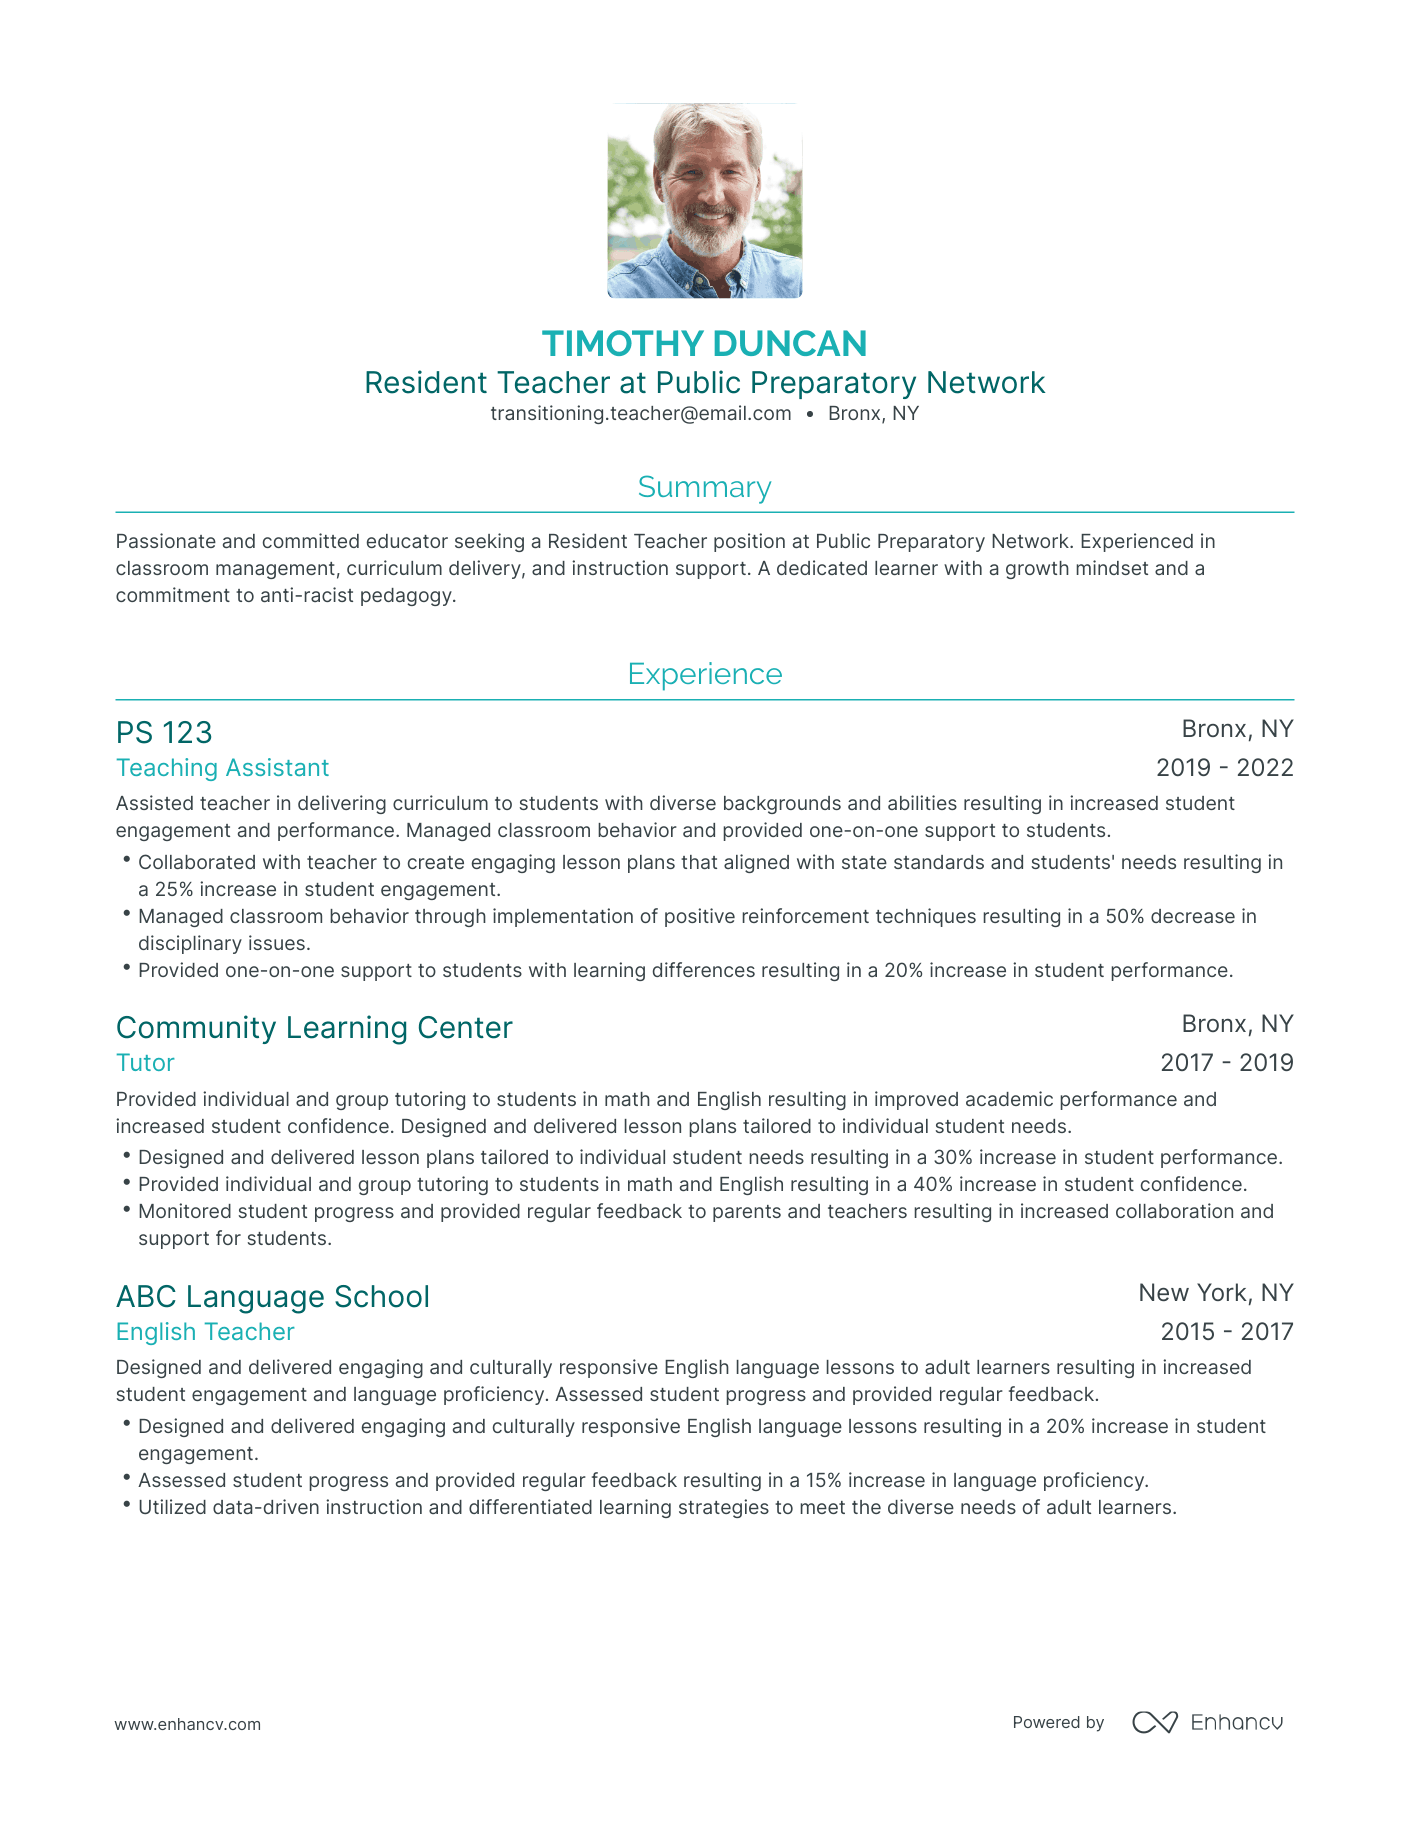 Traditional Transitioning Teacher Resume Template